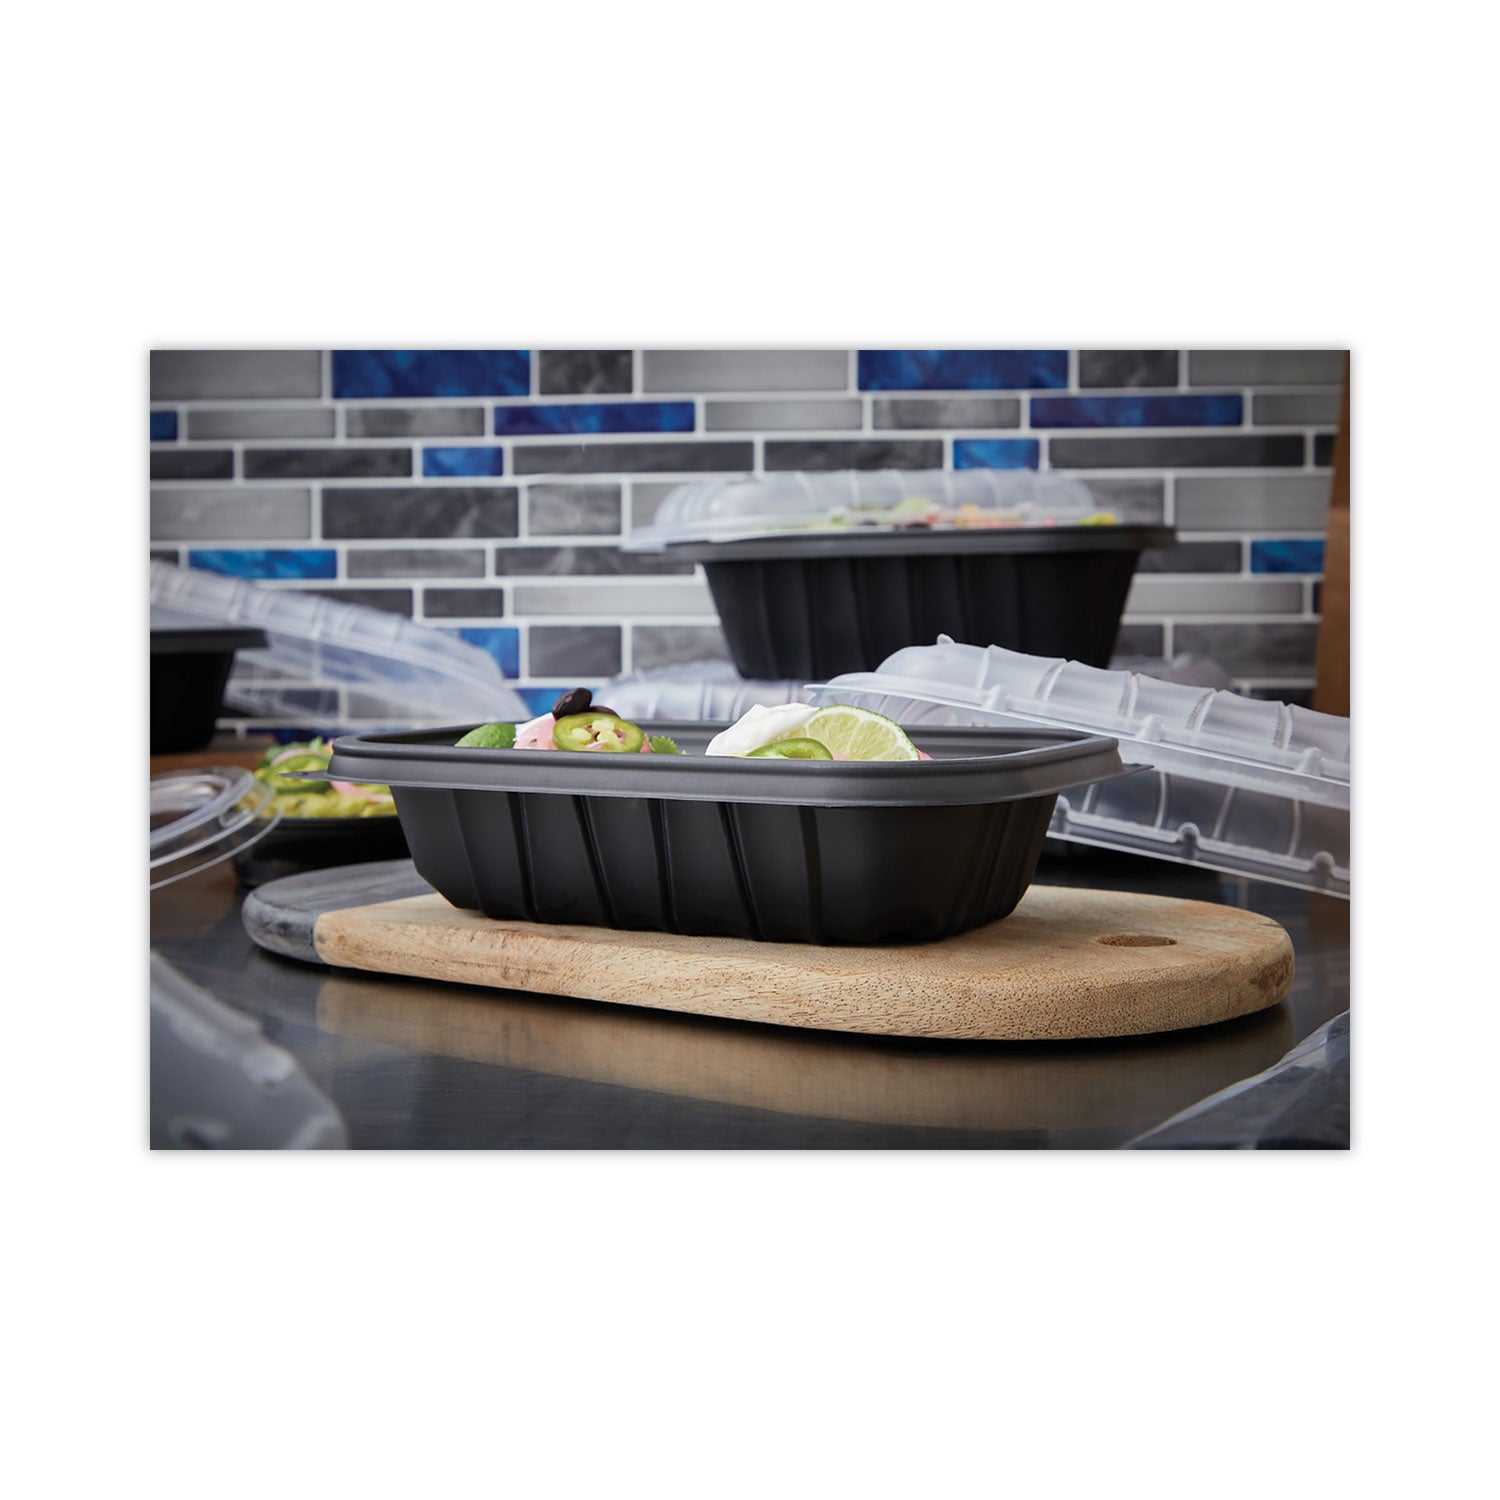 earthchoice-entree2go-takeout-container-24-oz-866-x-575-x-197-black-plastic-300-carton_pctycnb9x624000 - 3